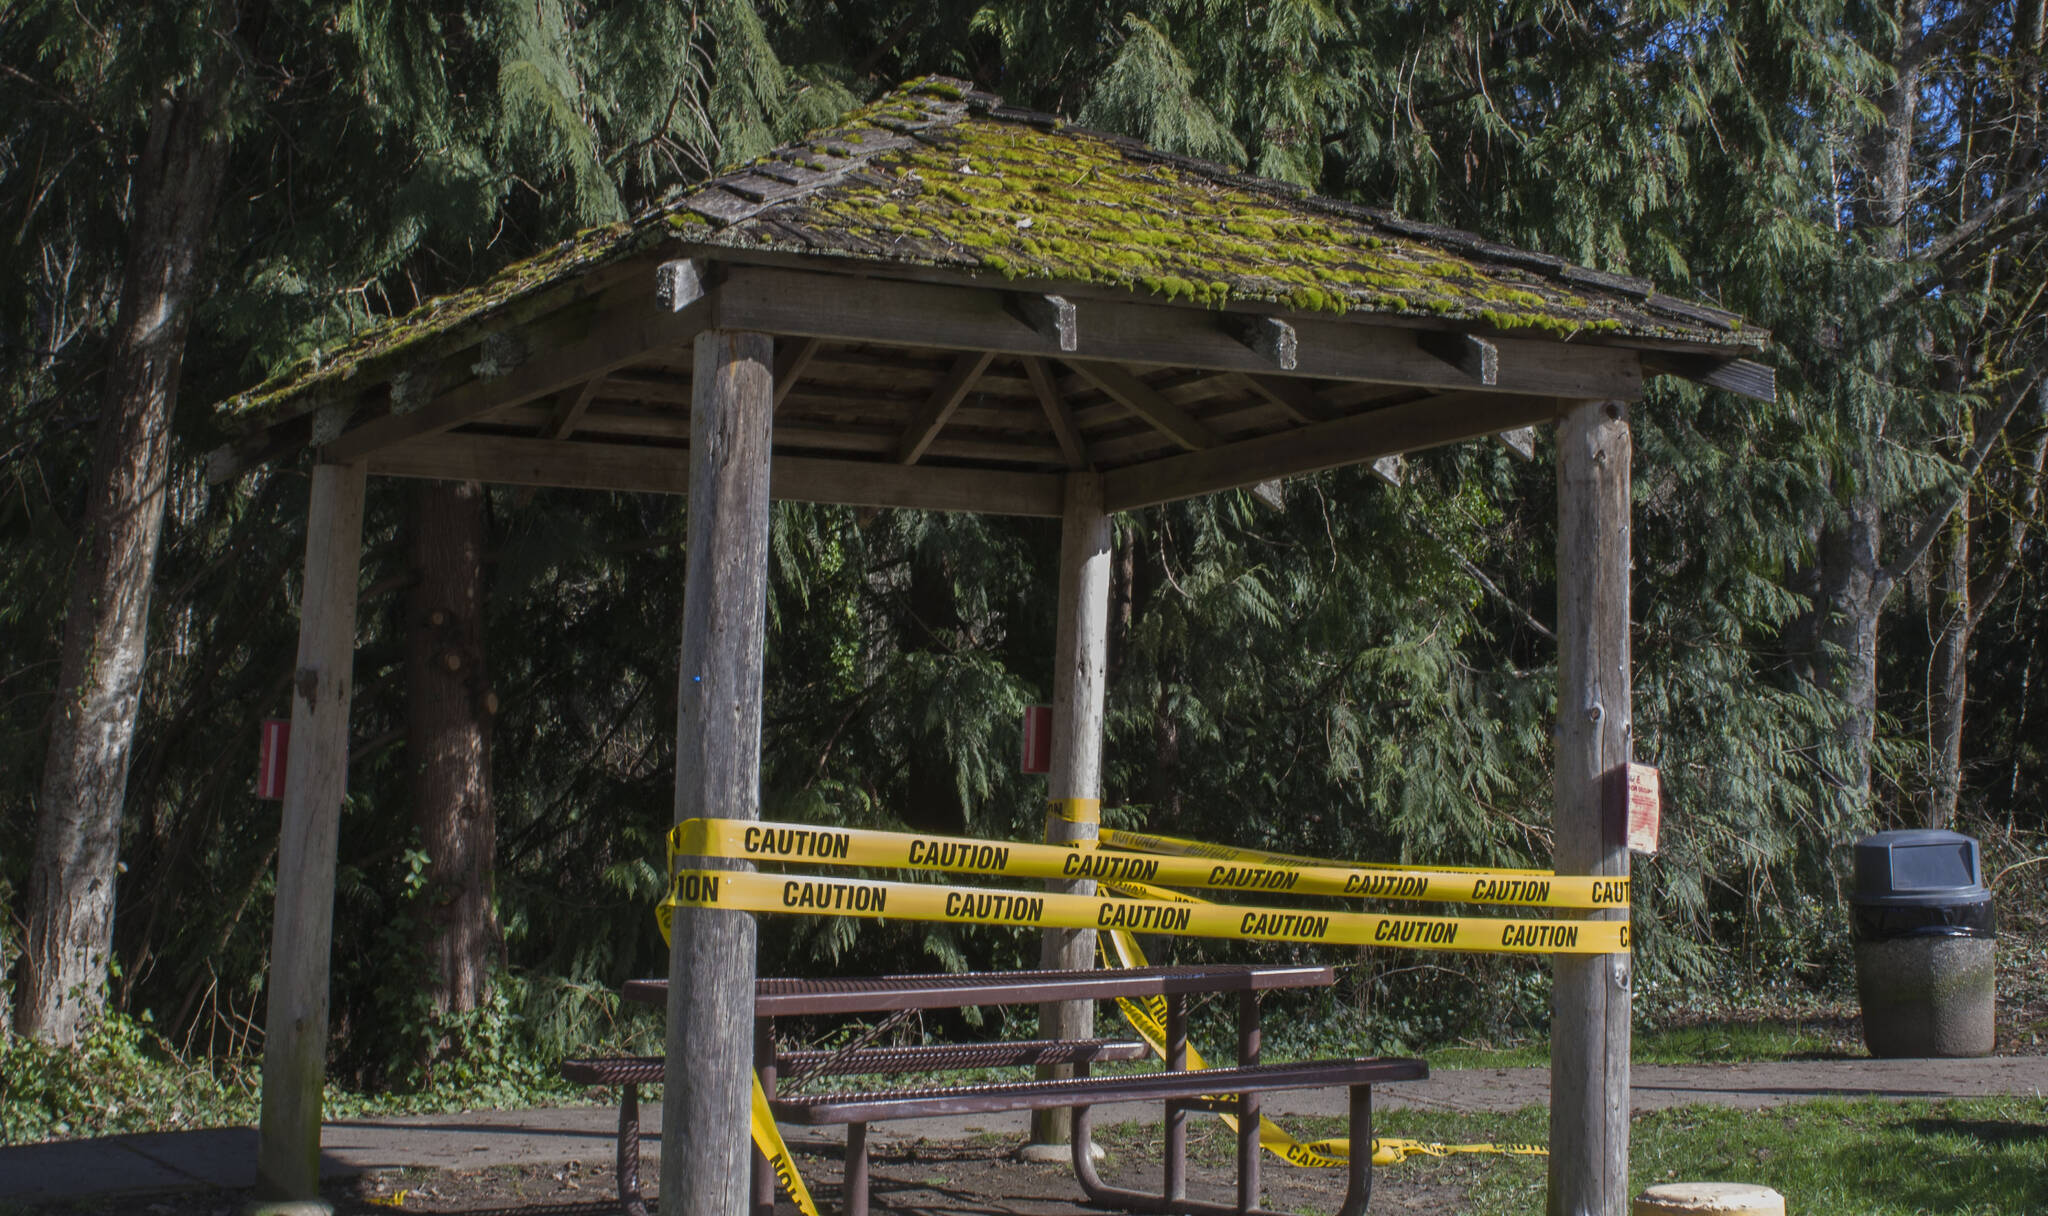 Molly Hetherwick/Kitsap News Group
The city of Bainbridge Island states that it does not have a replacement structure planned following the removal of the gazebo.